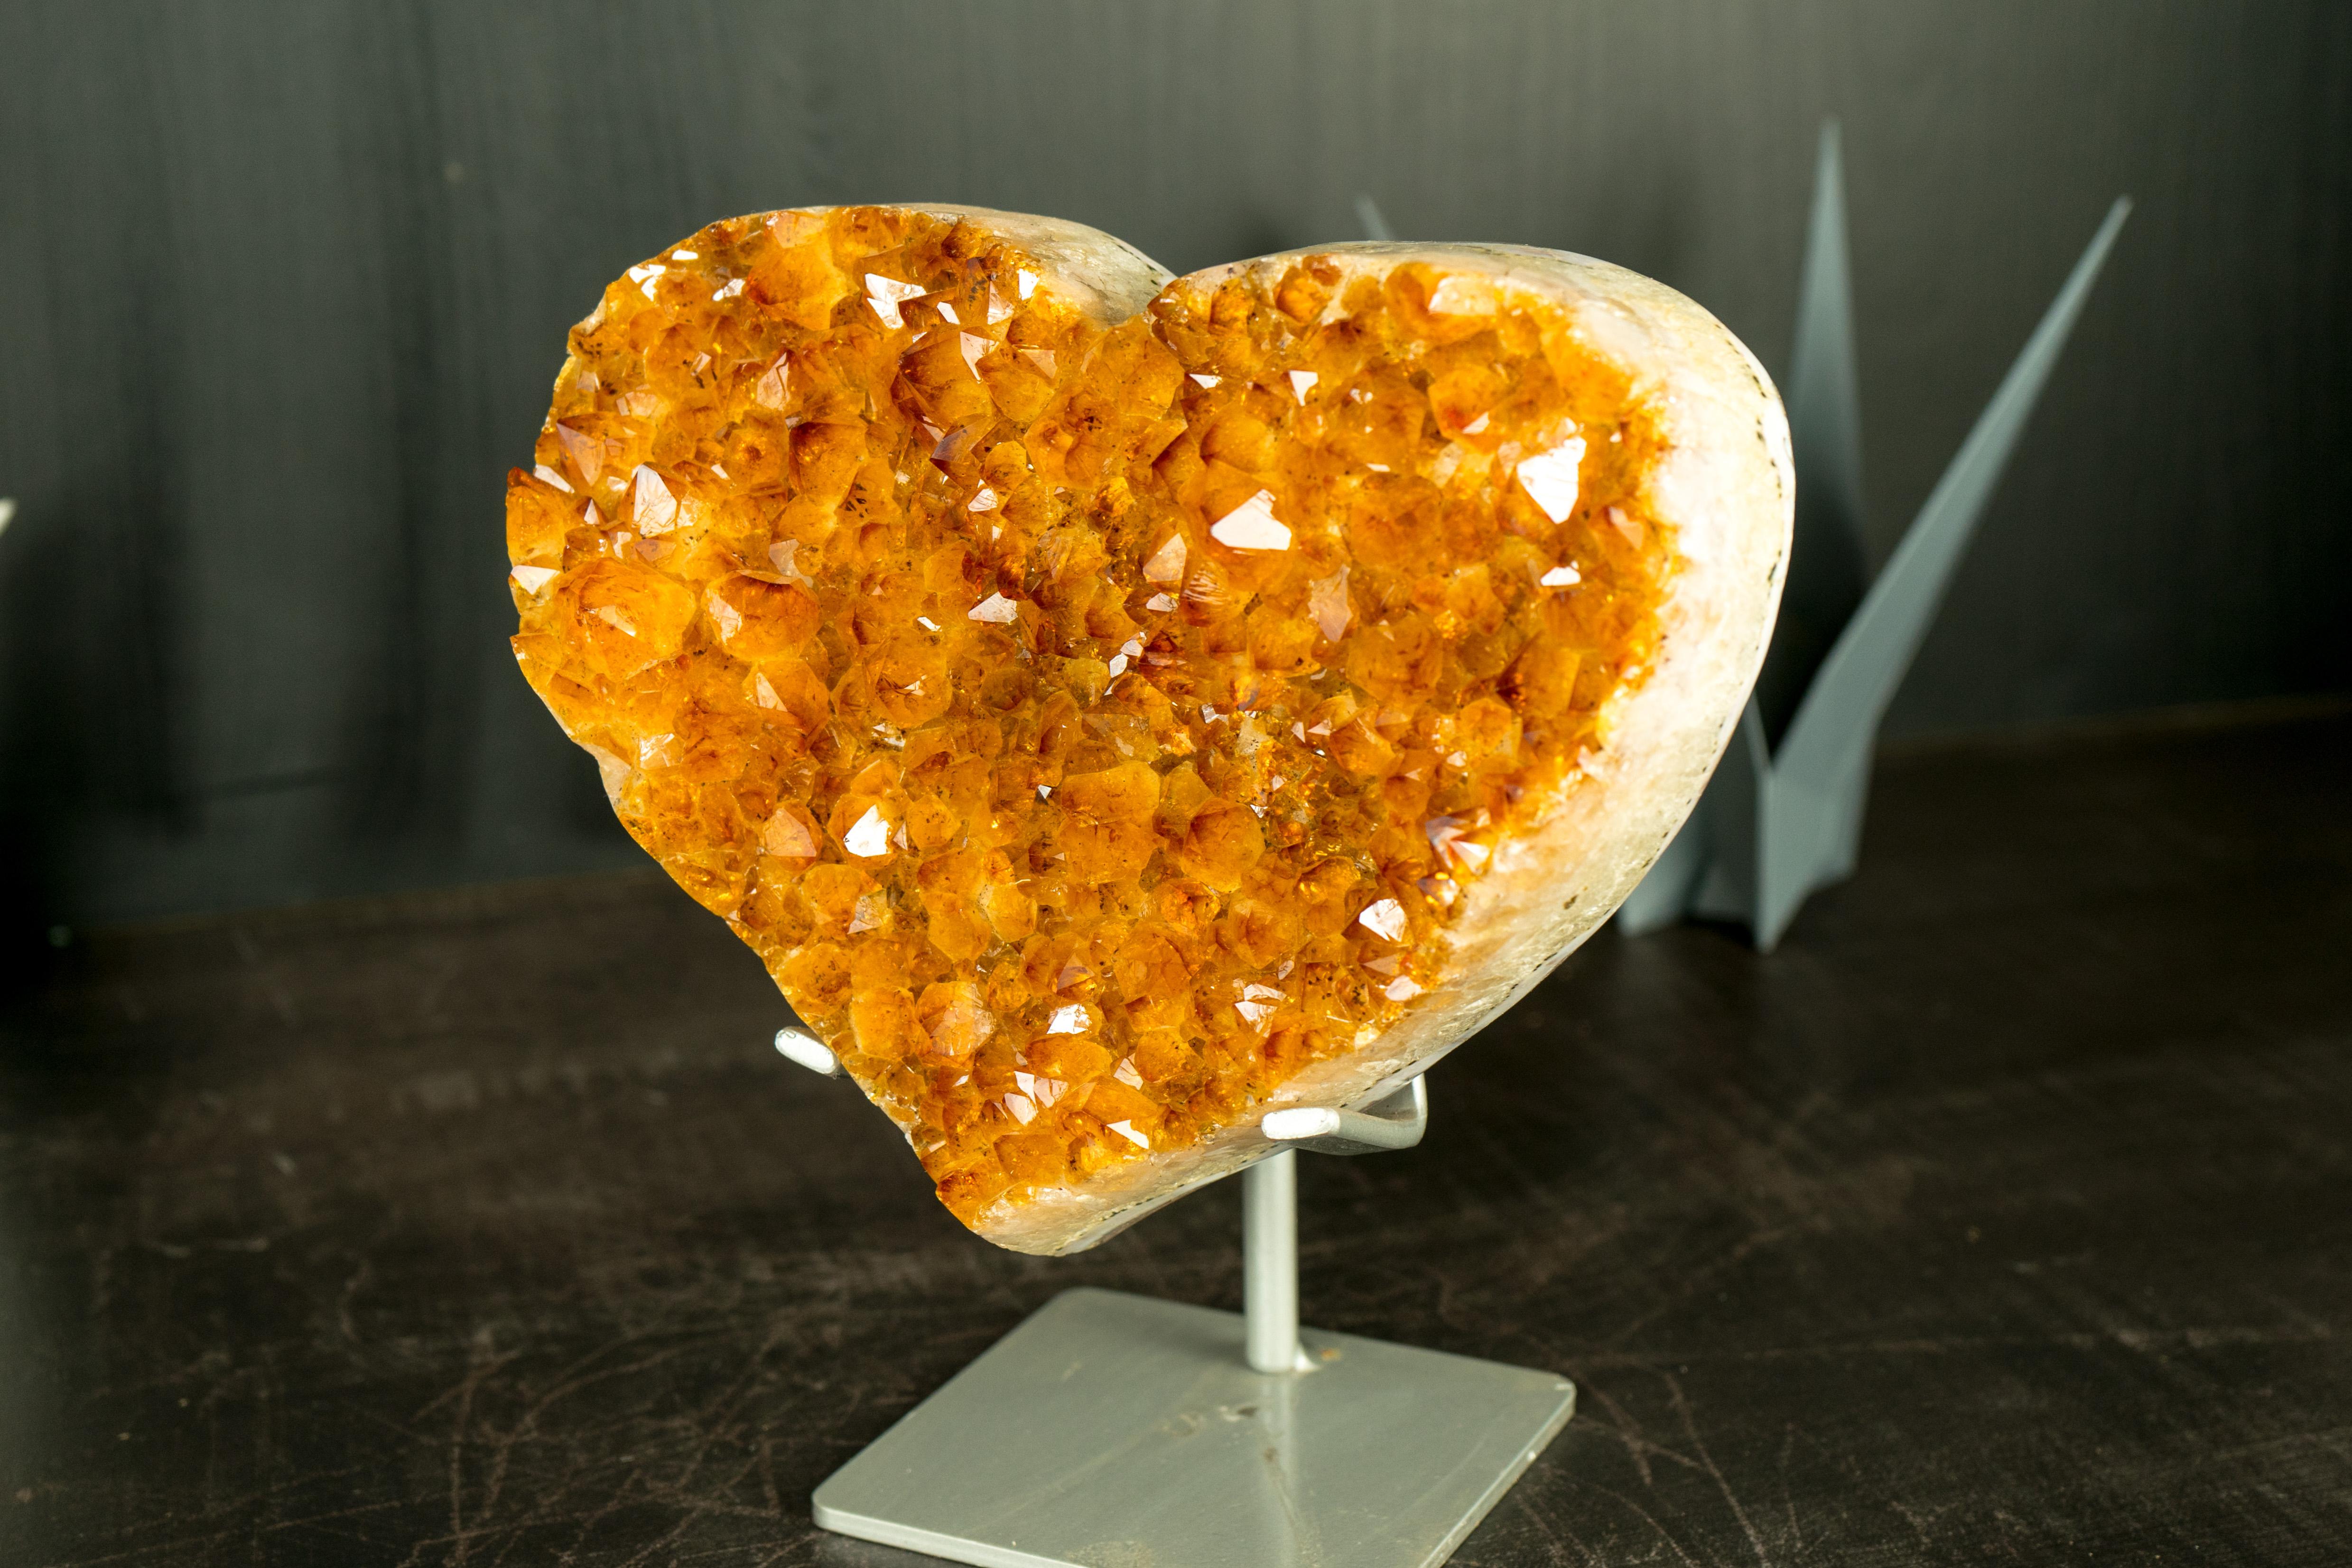 Agate AAA Citrine Heart with High-Grade Golden Orange Citrine Druzy For Sale